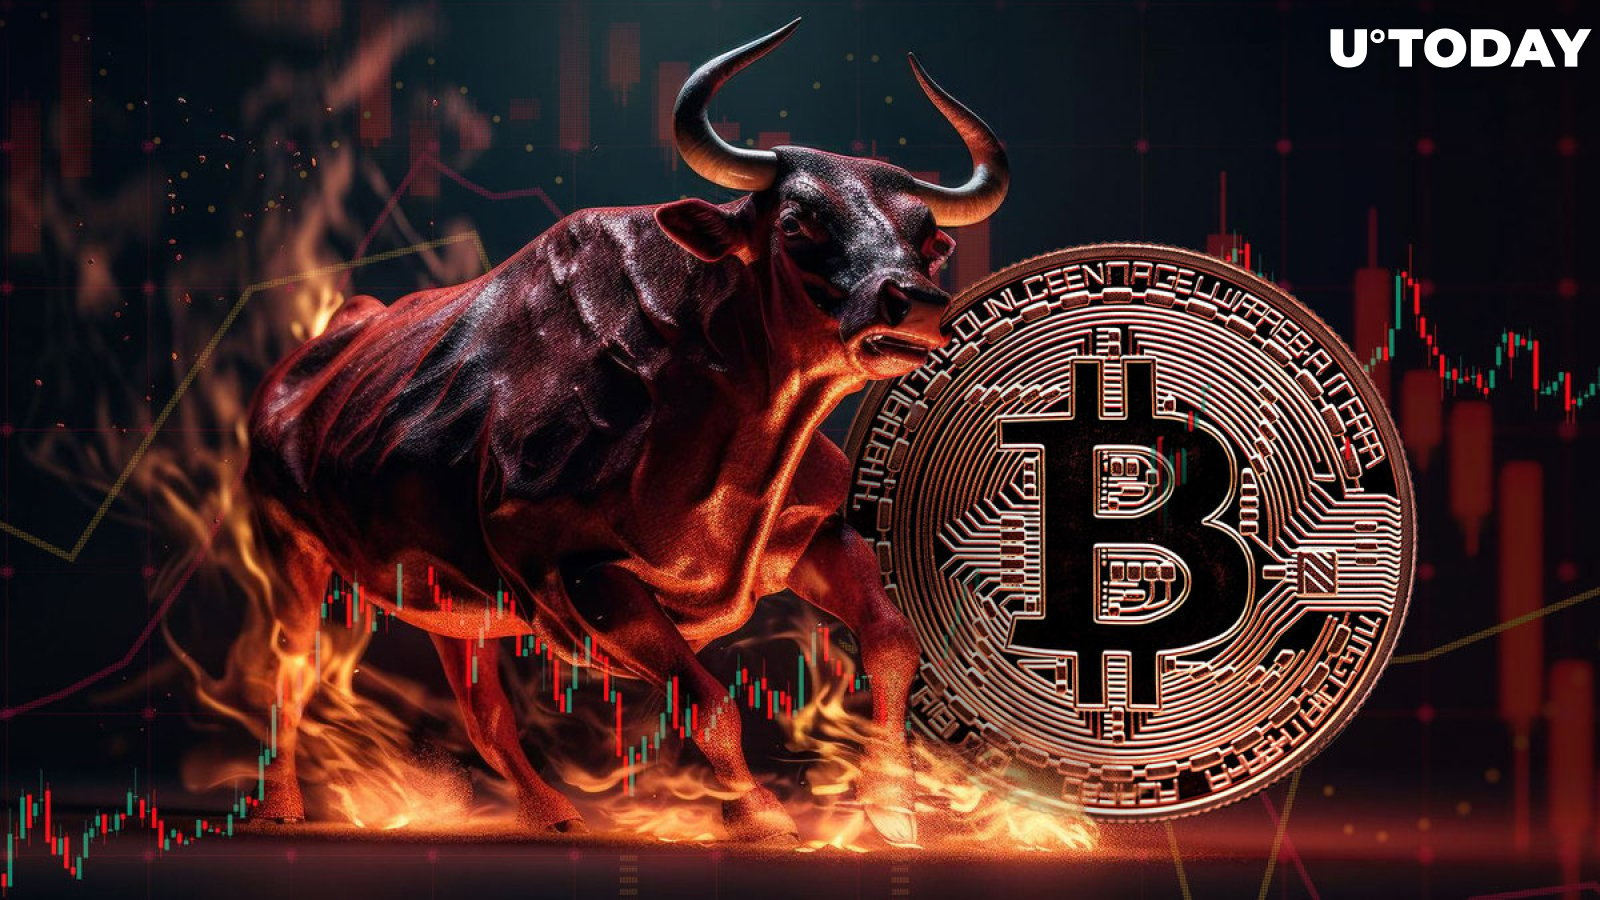 Bitcoin Bulls Back on Track as Japanese Stocks Recover